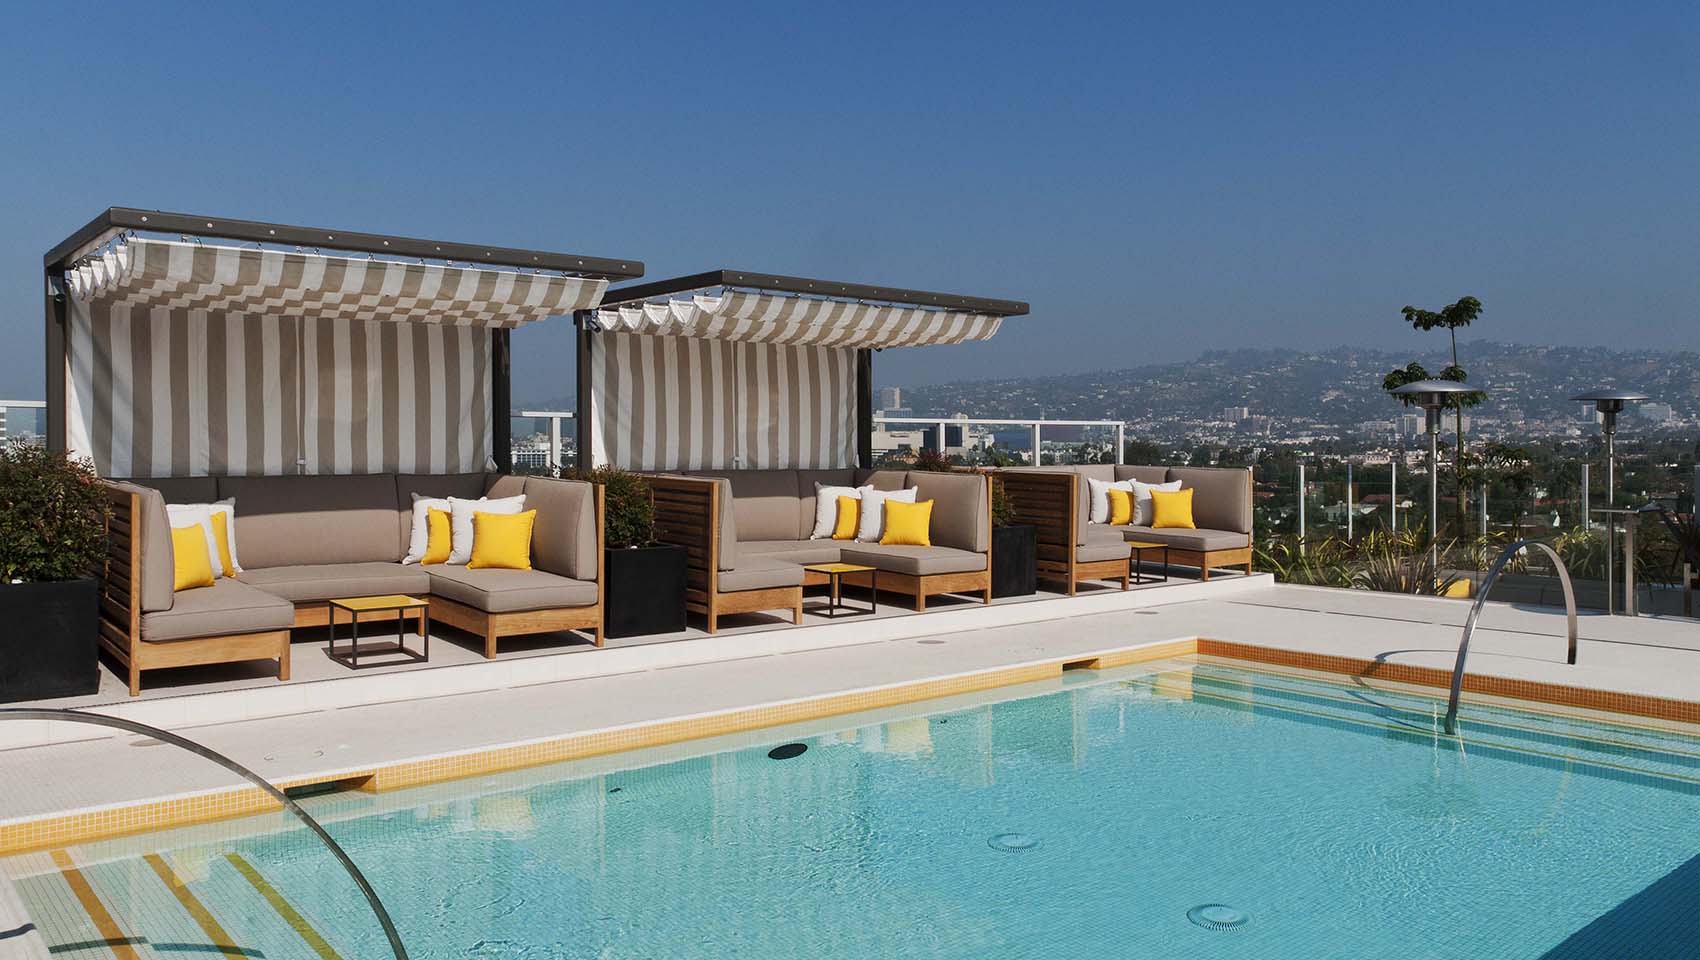 Kimpton Hotel Wilshire pool deck with lounge chairs